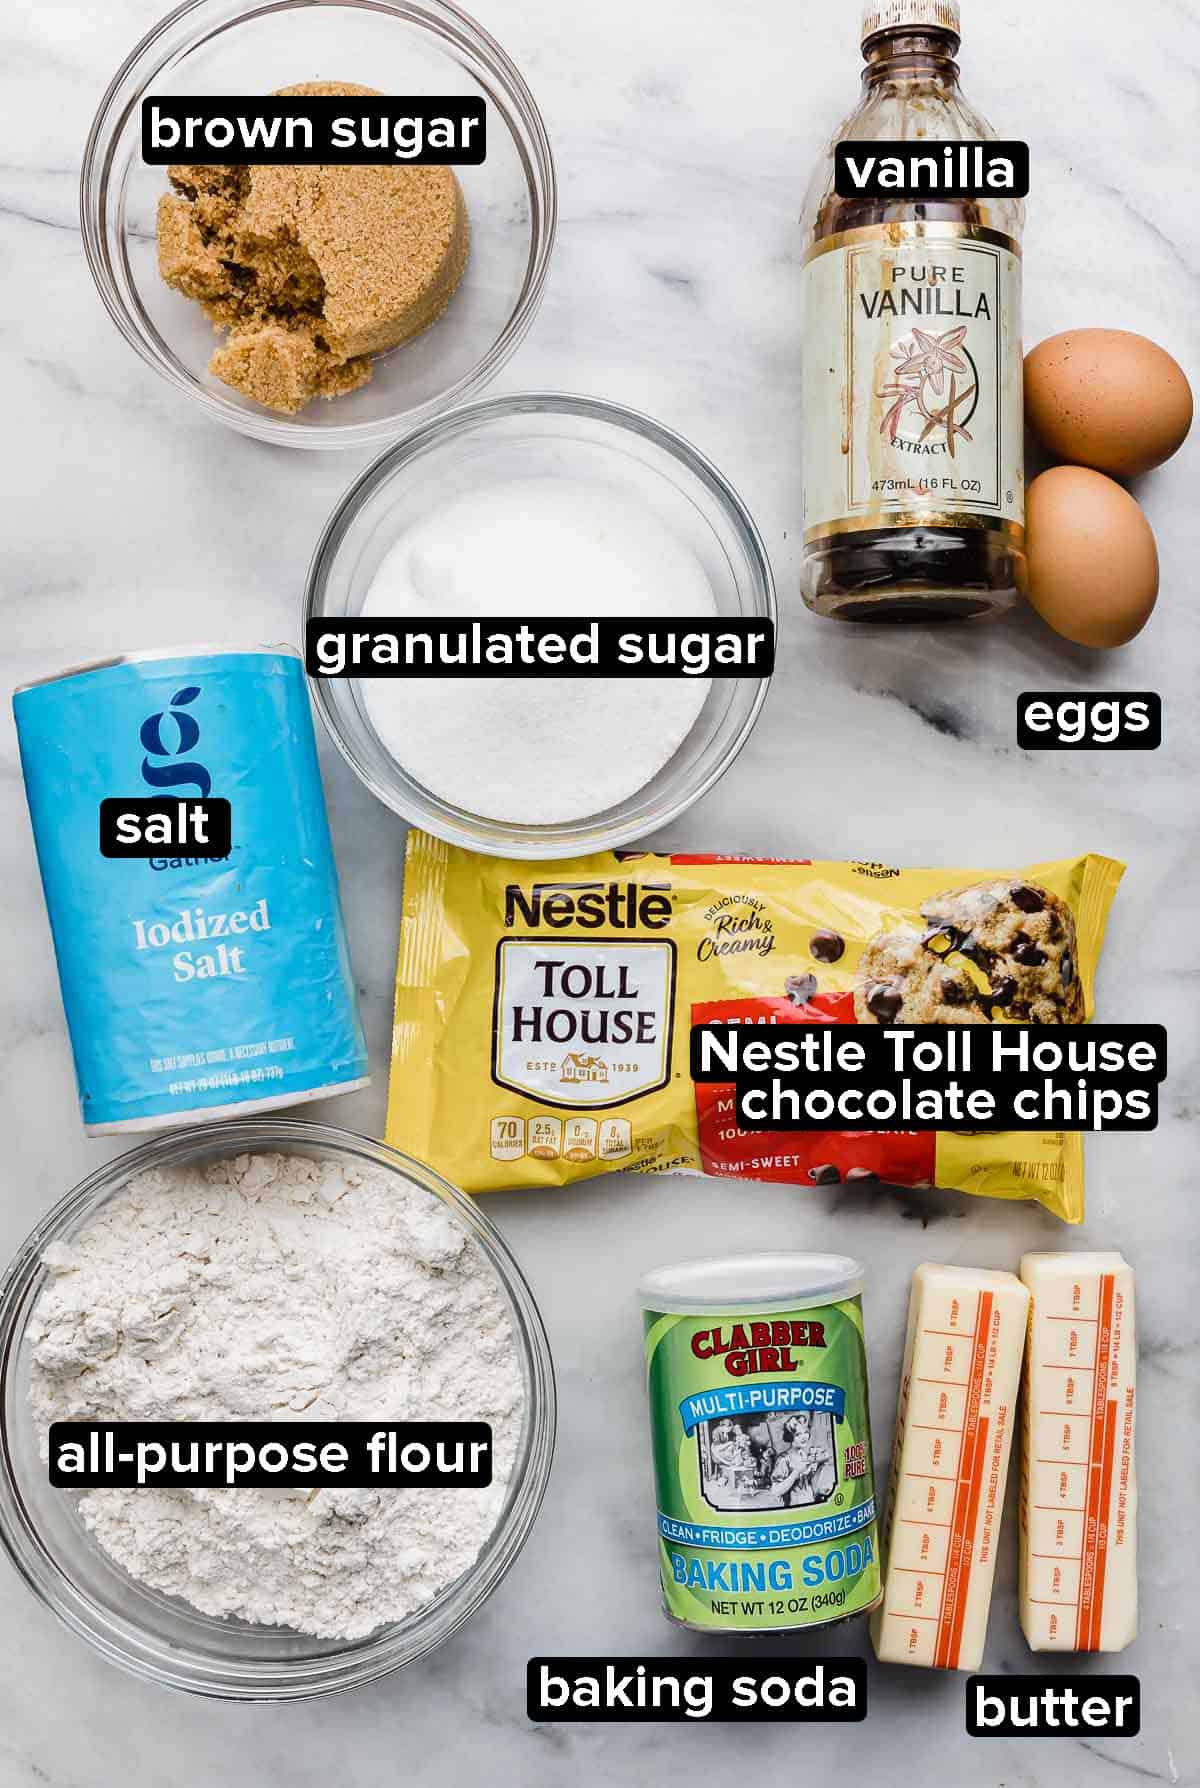 Nestle Toll House Chocolate Chip Cookie recipe ingredients on a white background: salt, flour, butter, baking soda, semi-sweet chocolate chips, sugar, and brown sugar, and eggs.